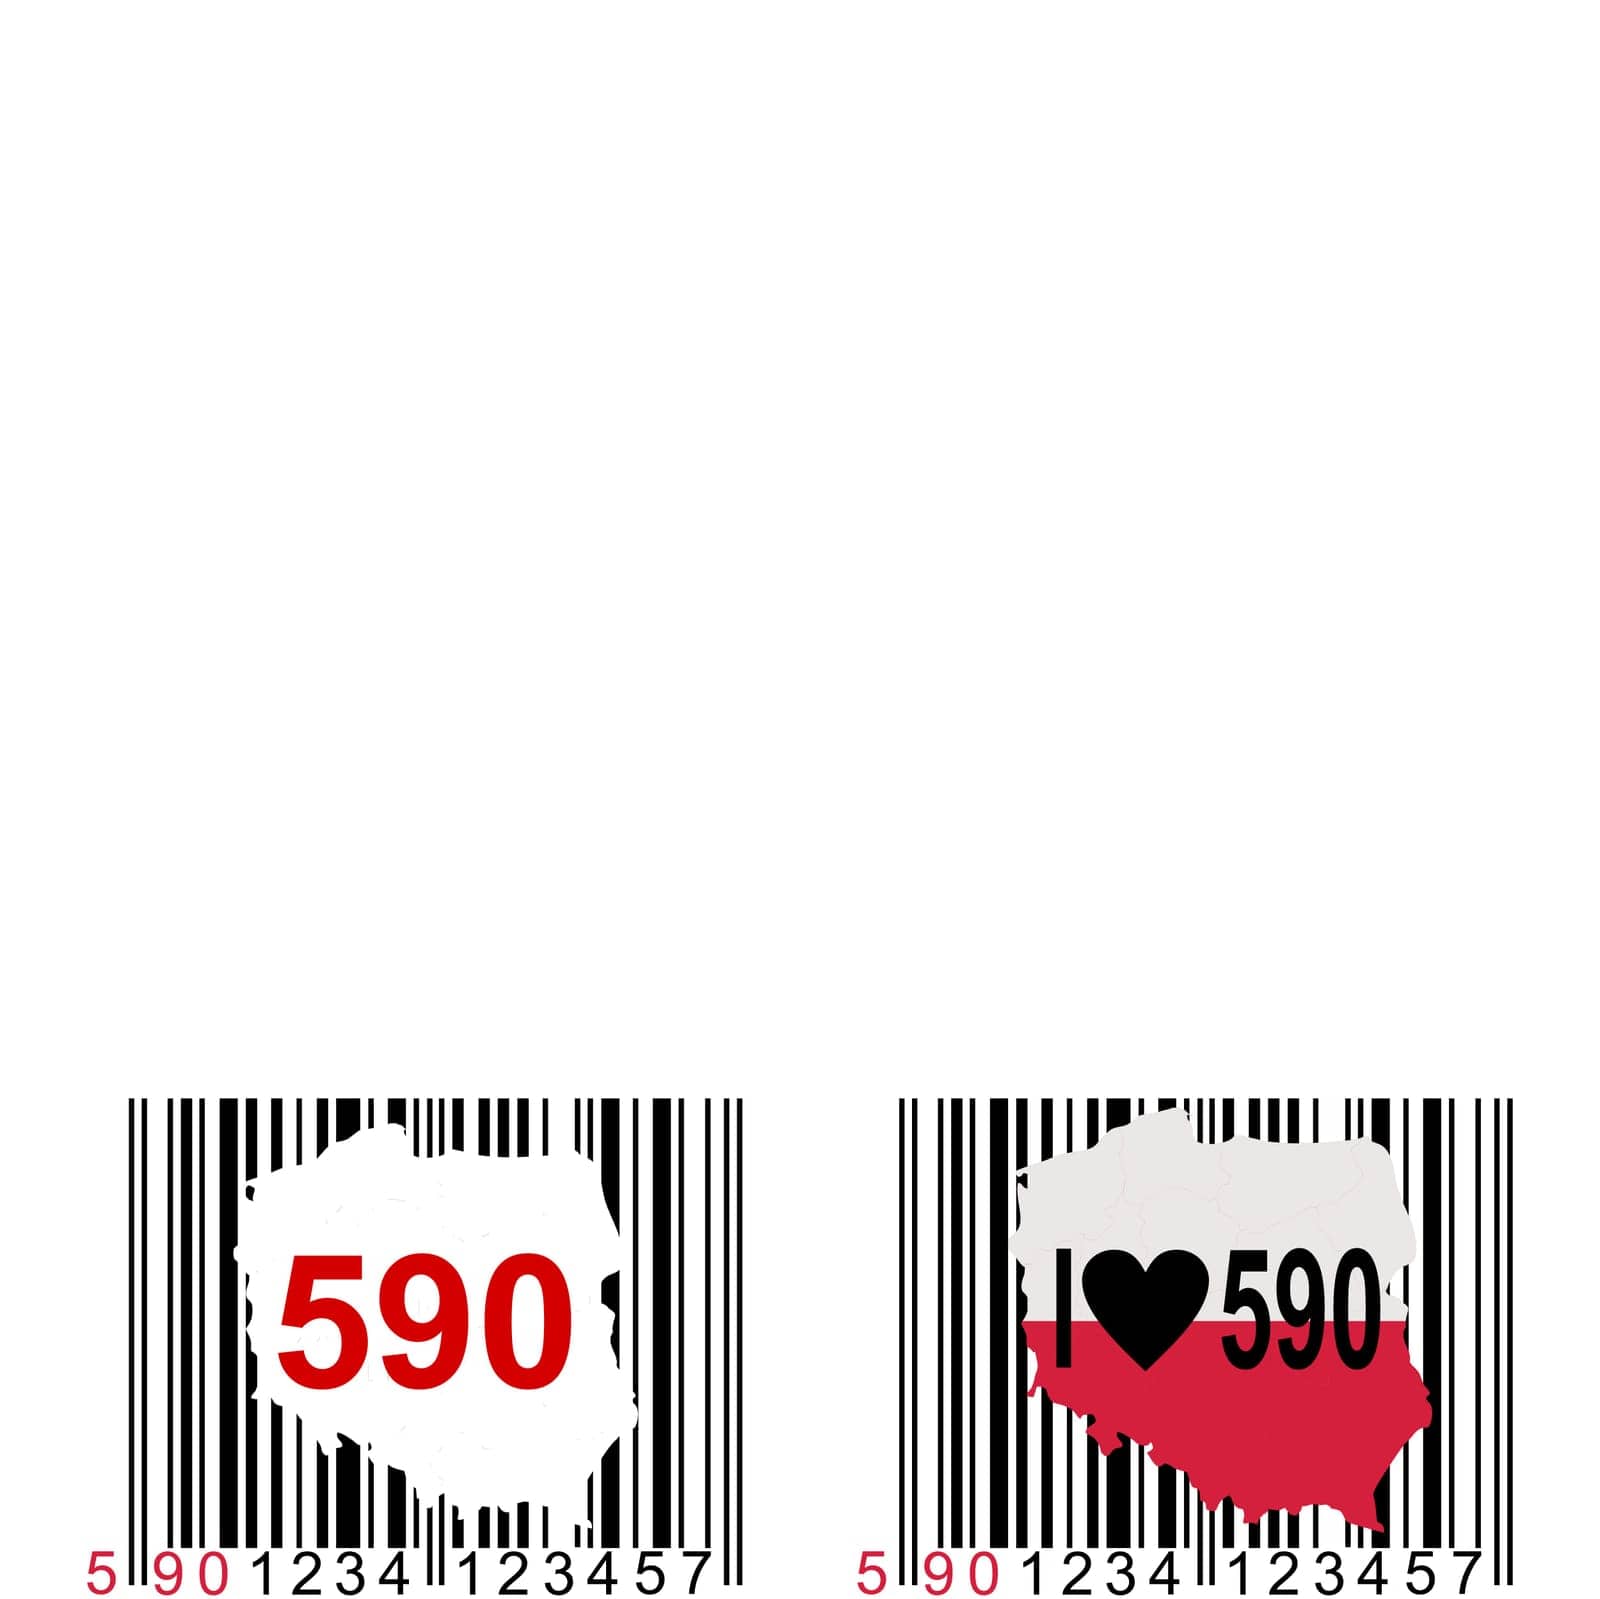 Love for Polish products by buying those with the first 590 numbers in the bar code label. by fotodrobik